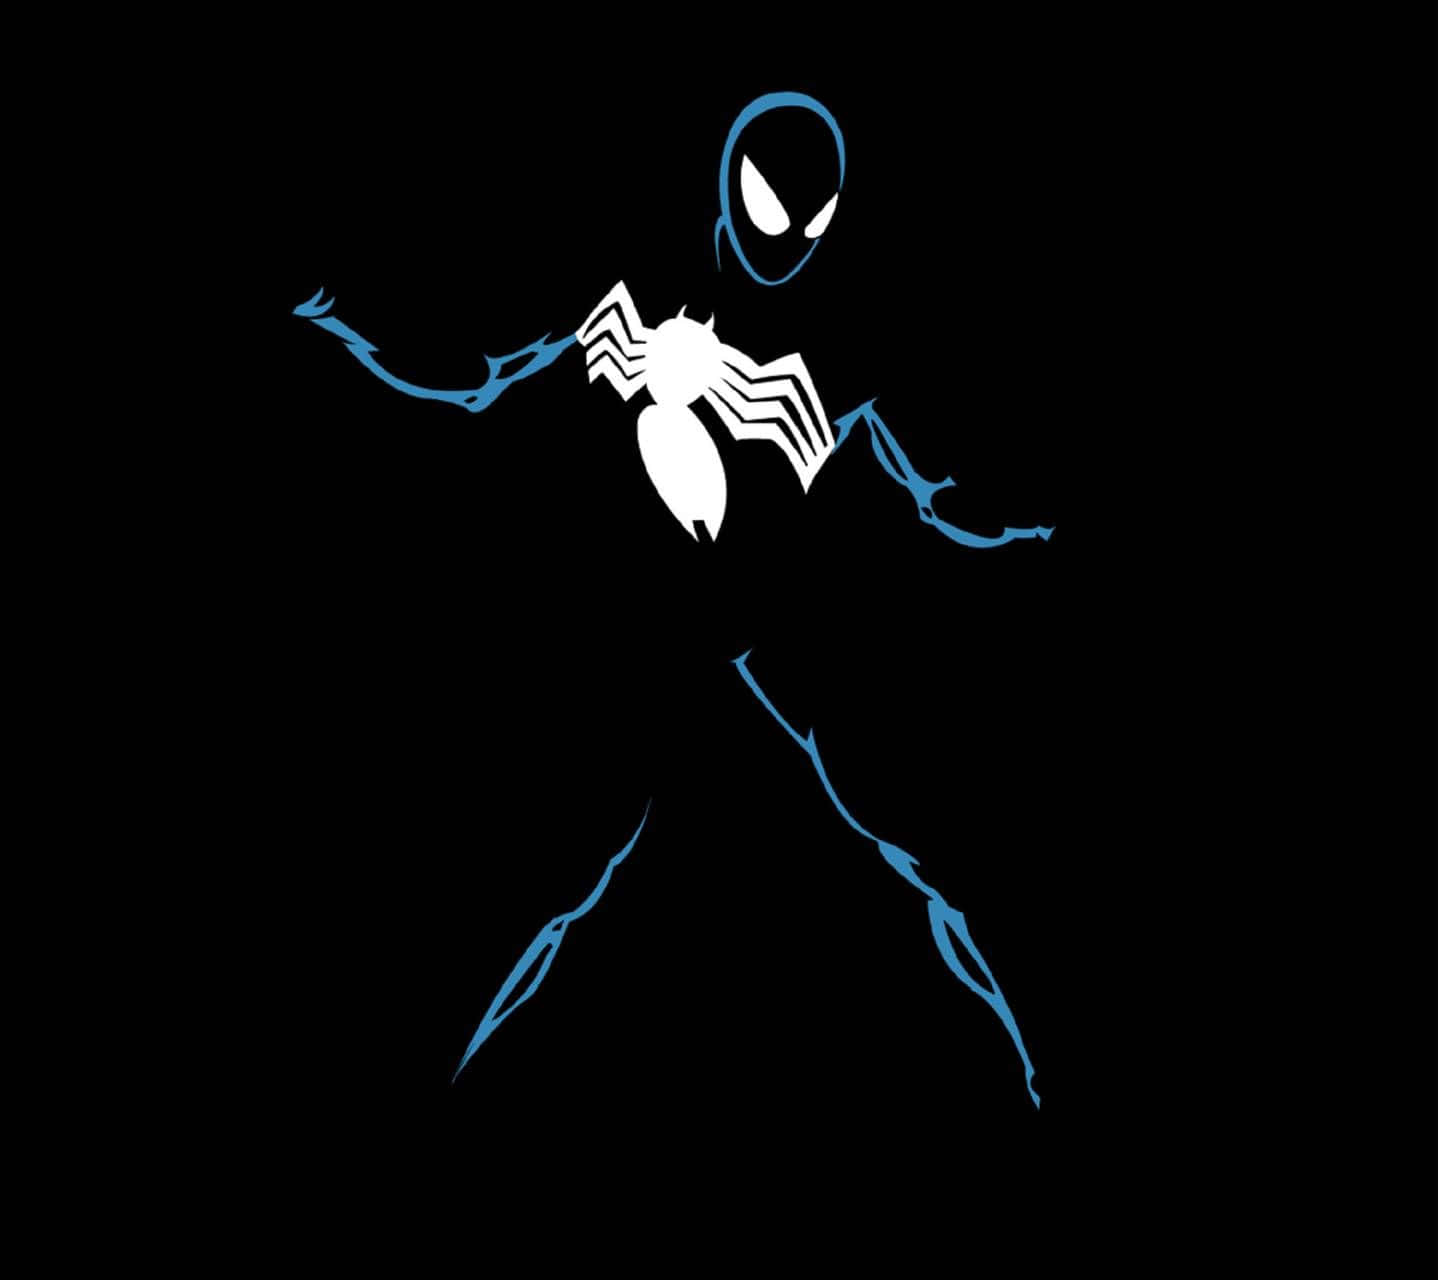 Symbiote in action, taking over its host Wallpaper